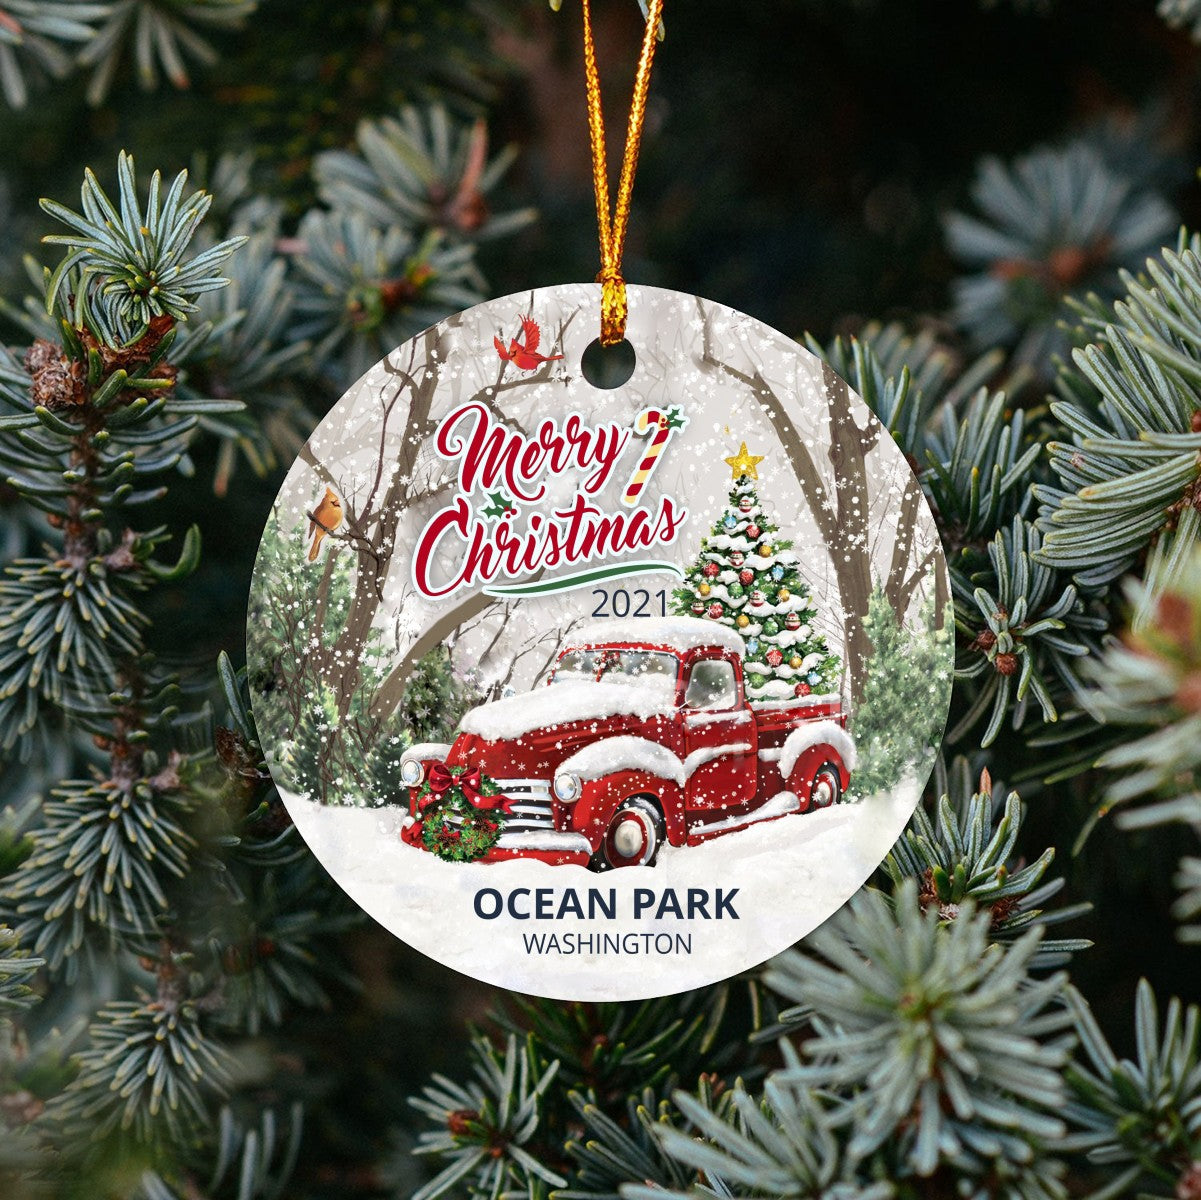 Christmas Tree Ornaments Ocean Park - Ornament With Name City, State Ocean Park Washington WA Ornament - Red Truck Xmas Ornaments 3'' Plastic Gift For Family, Friend And Housewarming